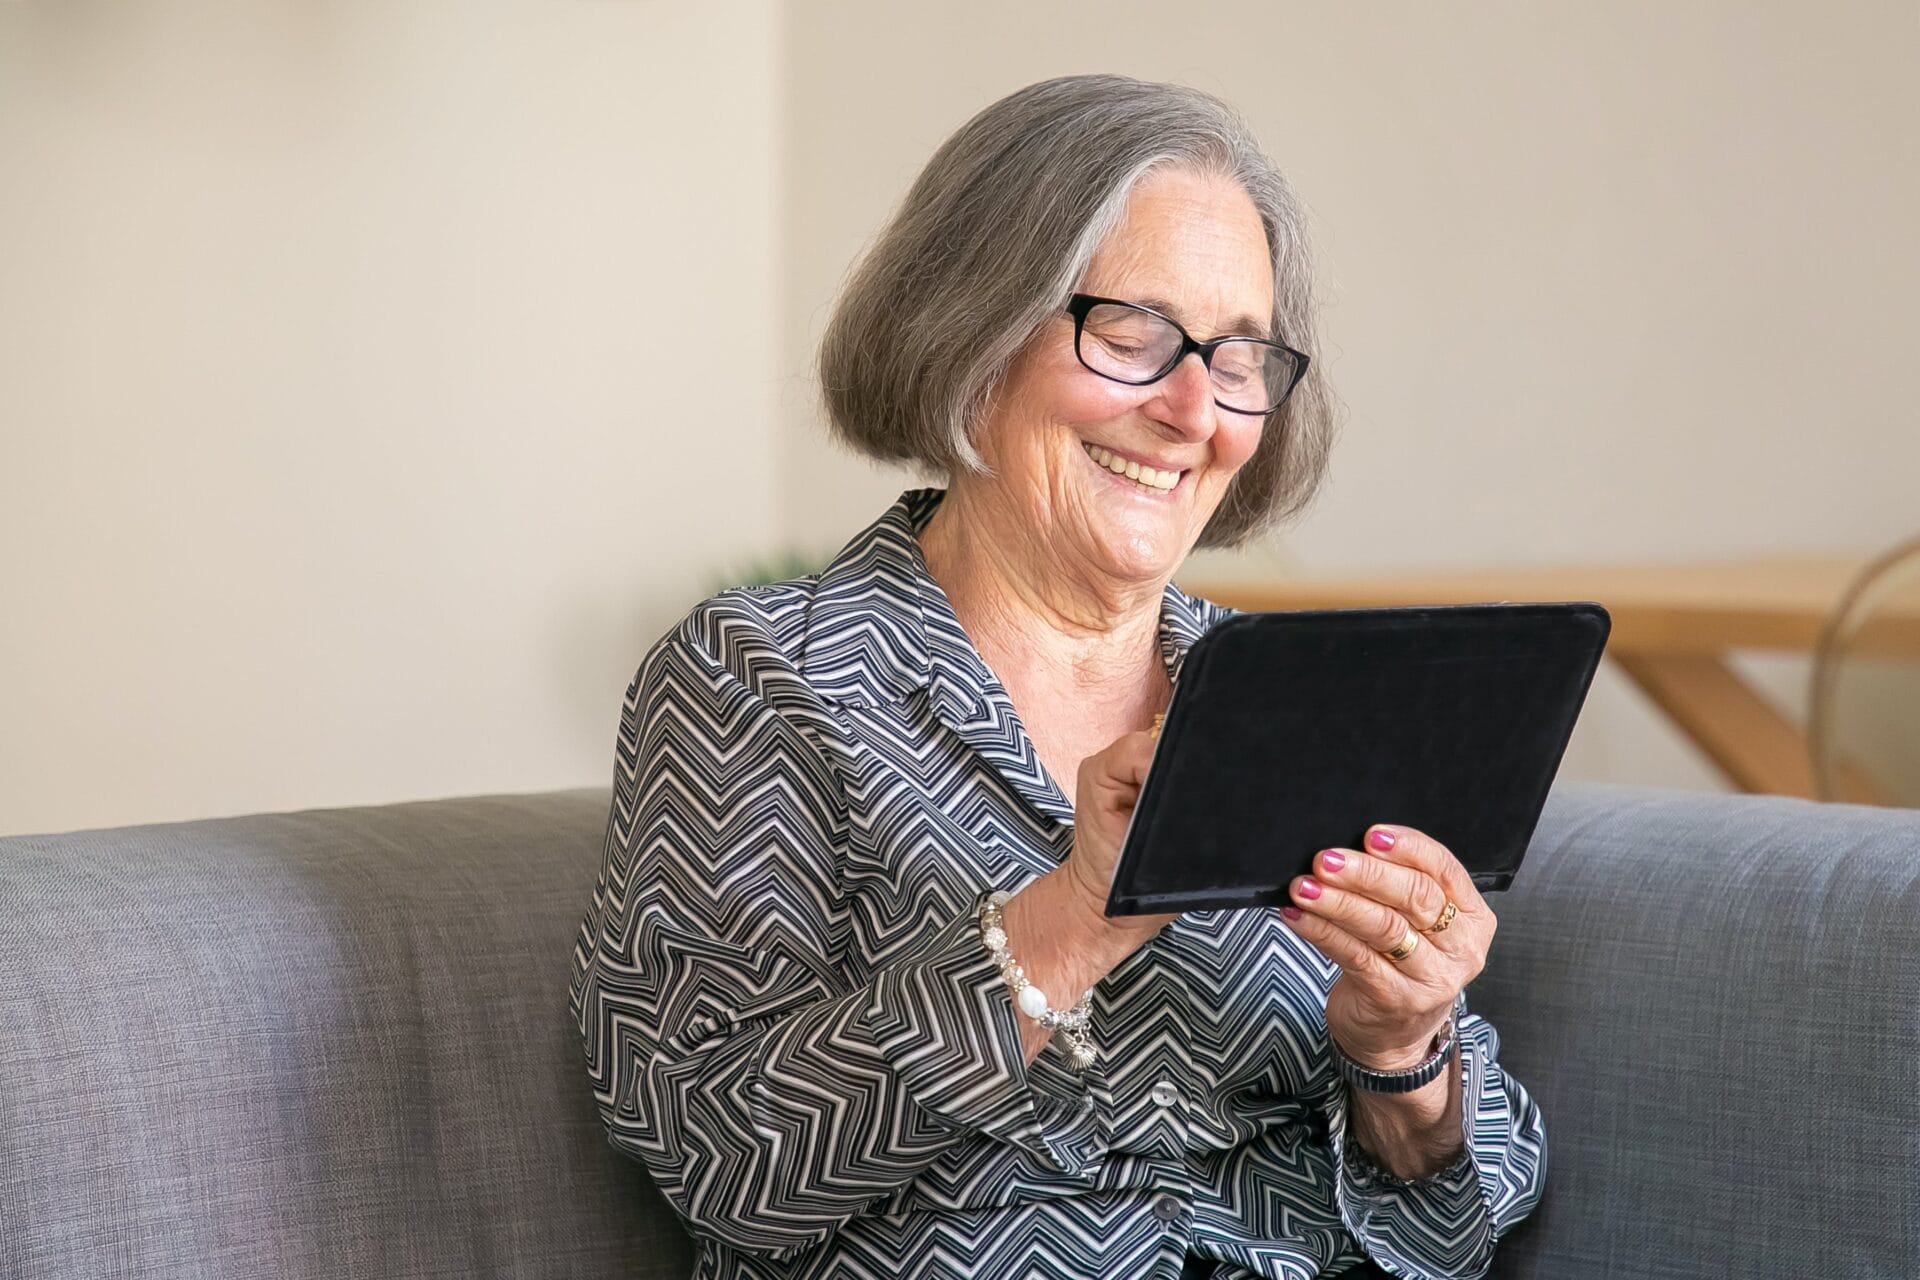 An elderly woman smiling at a mobile tablet